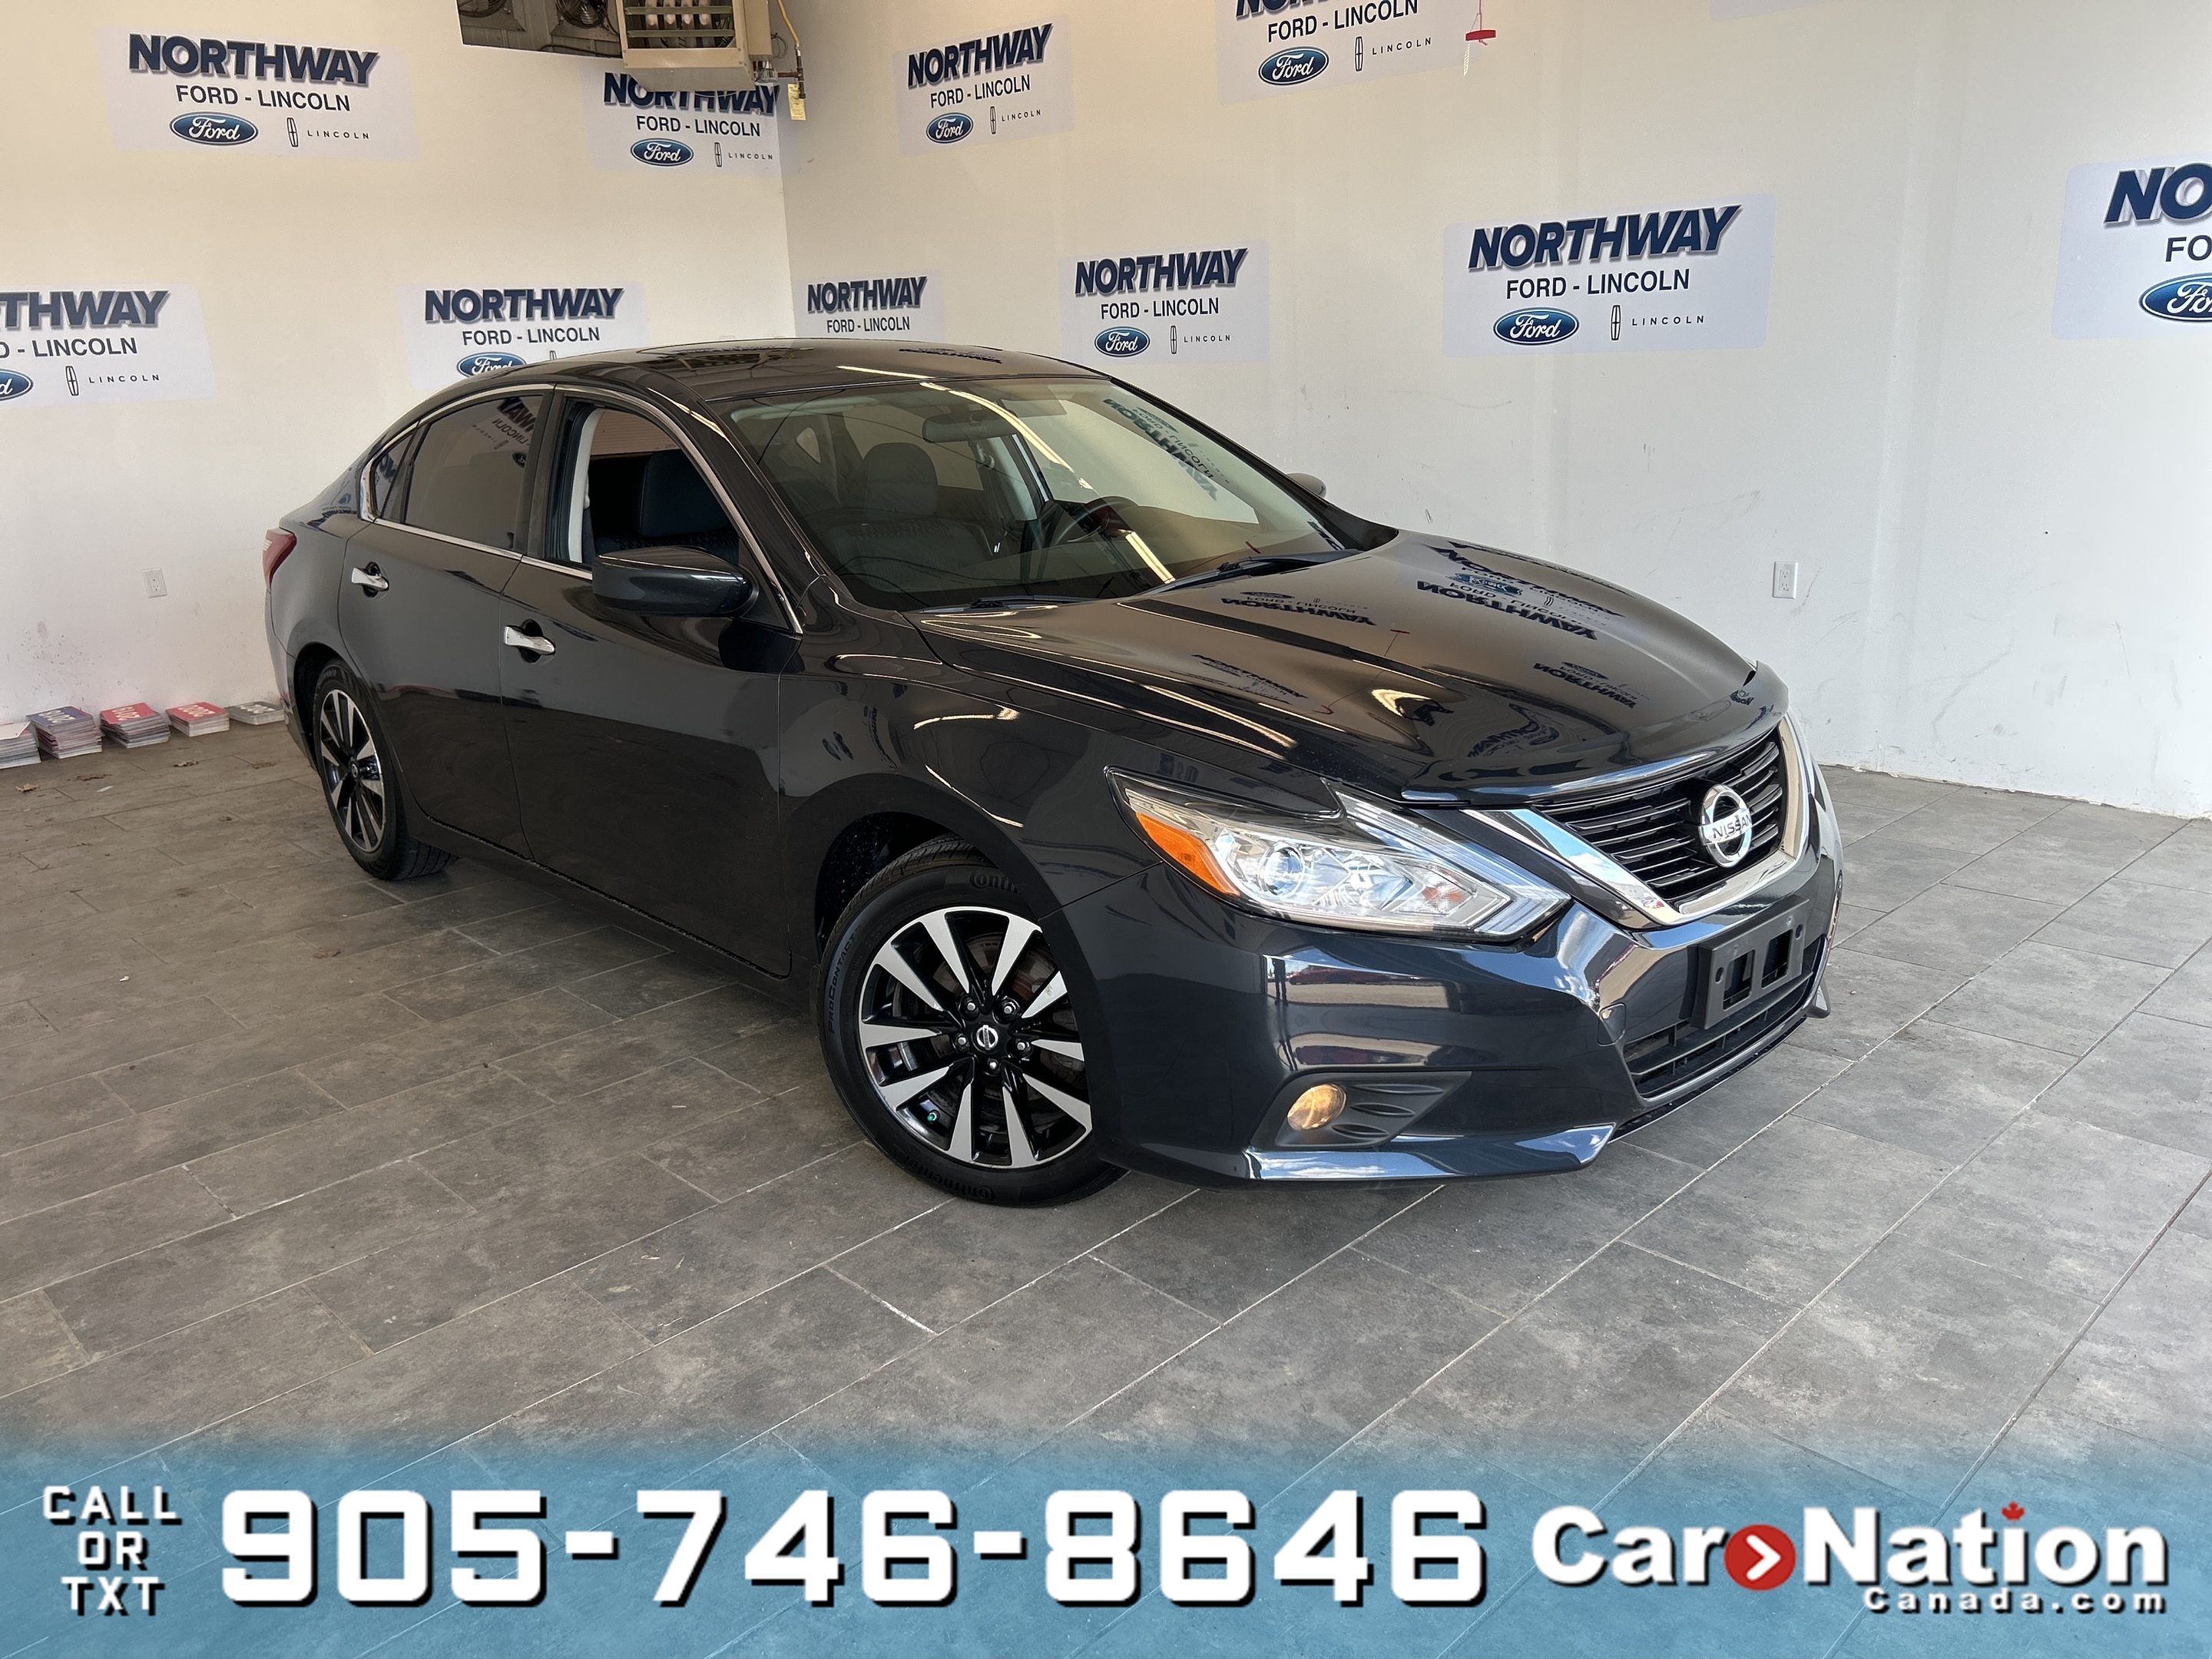 2018 Nissan Altima SV | TOUCHSCREEN | SUNROOF | WE WANT YOUR TRADE!